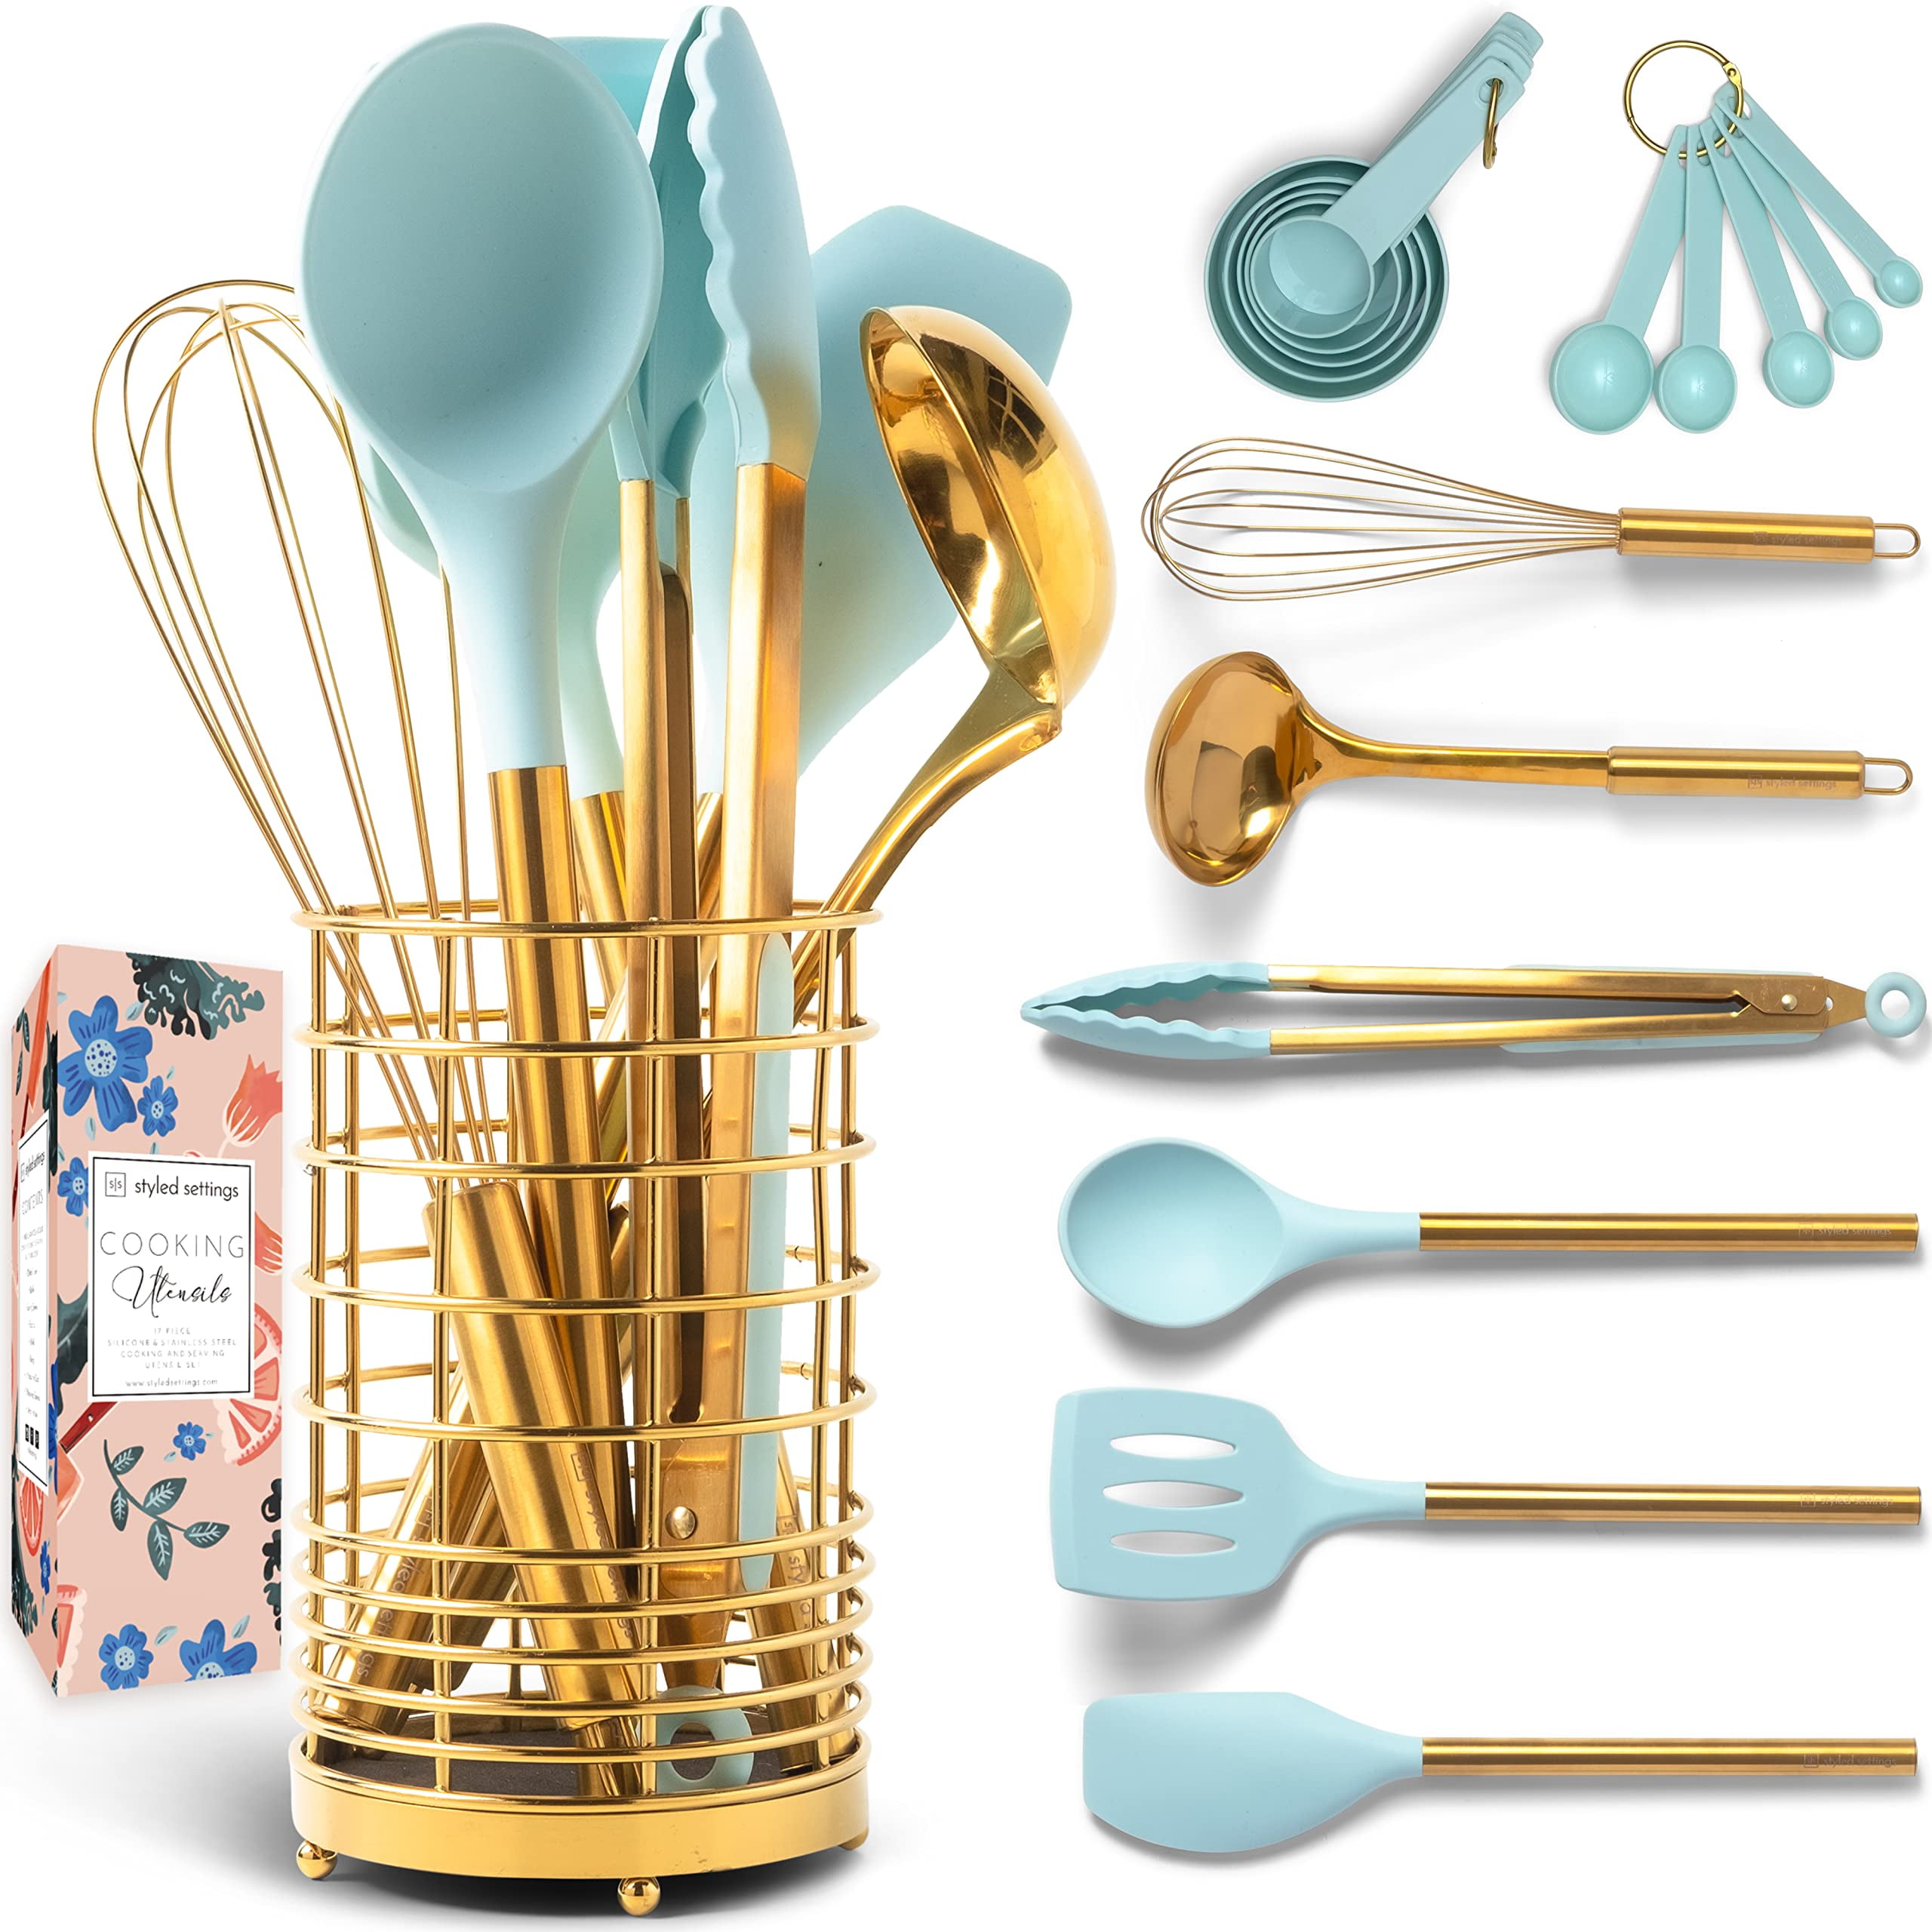 Styled Settings White & Gold Silicone Utensils with Holder and Measuring Cups & Spoons Set